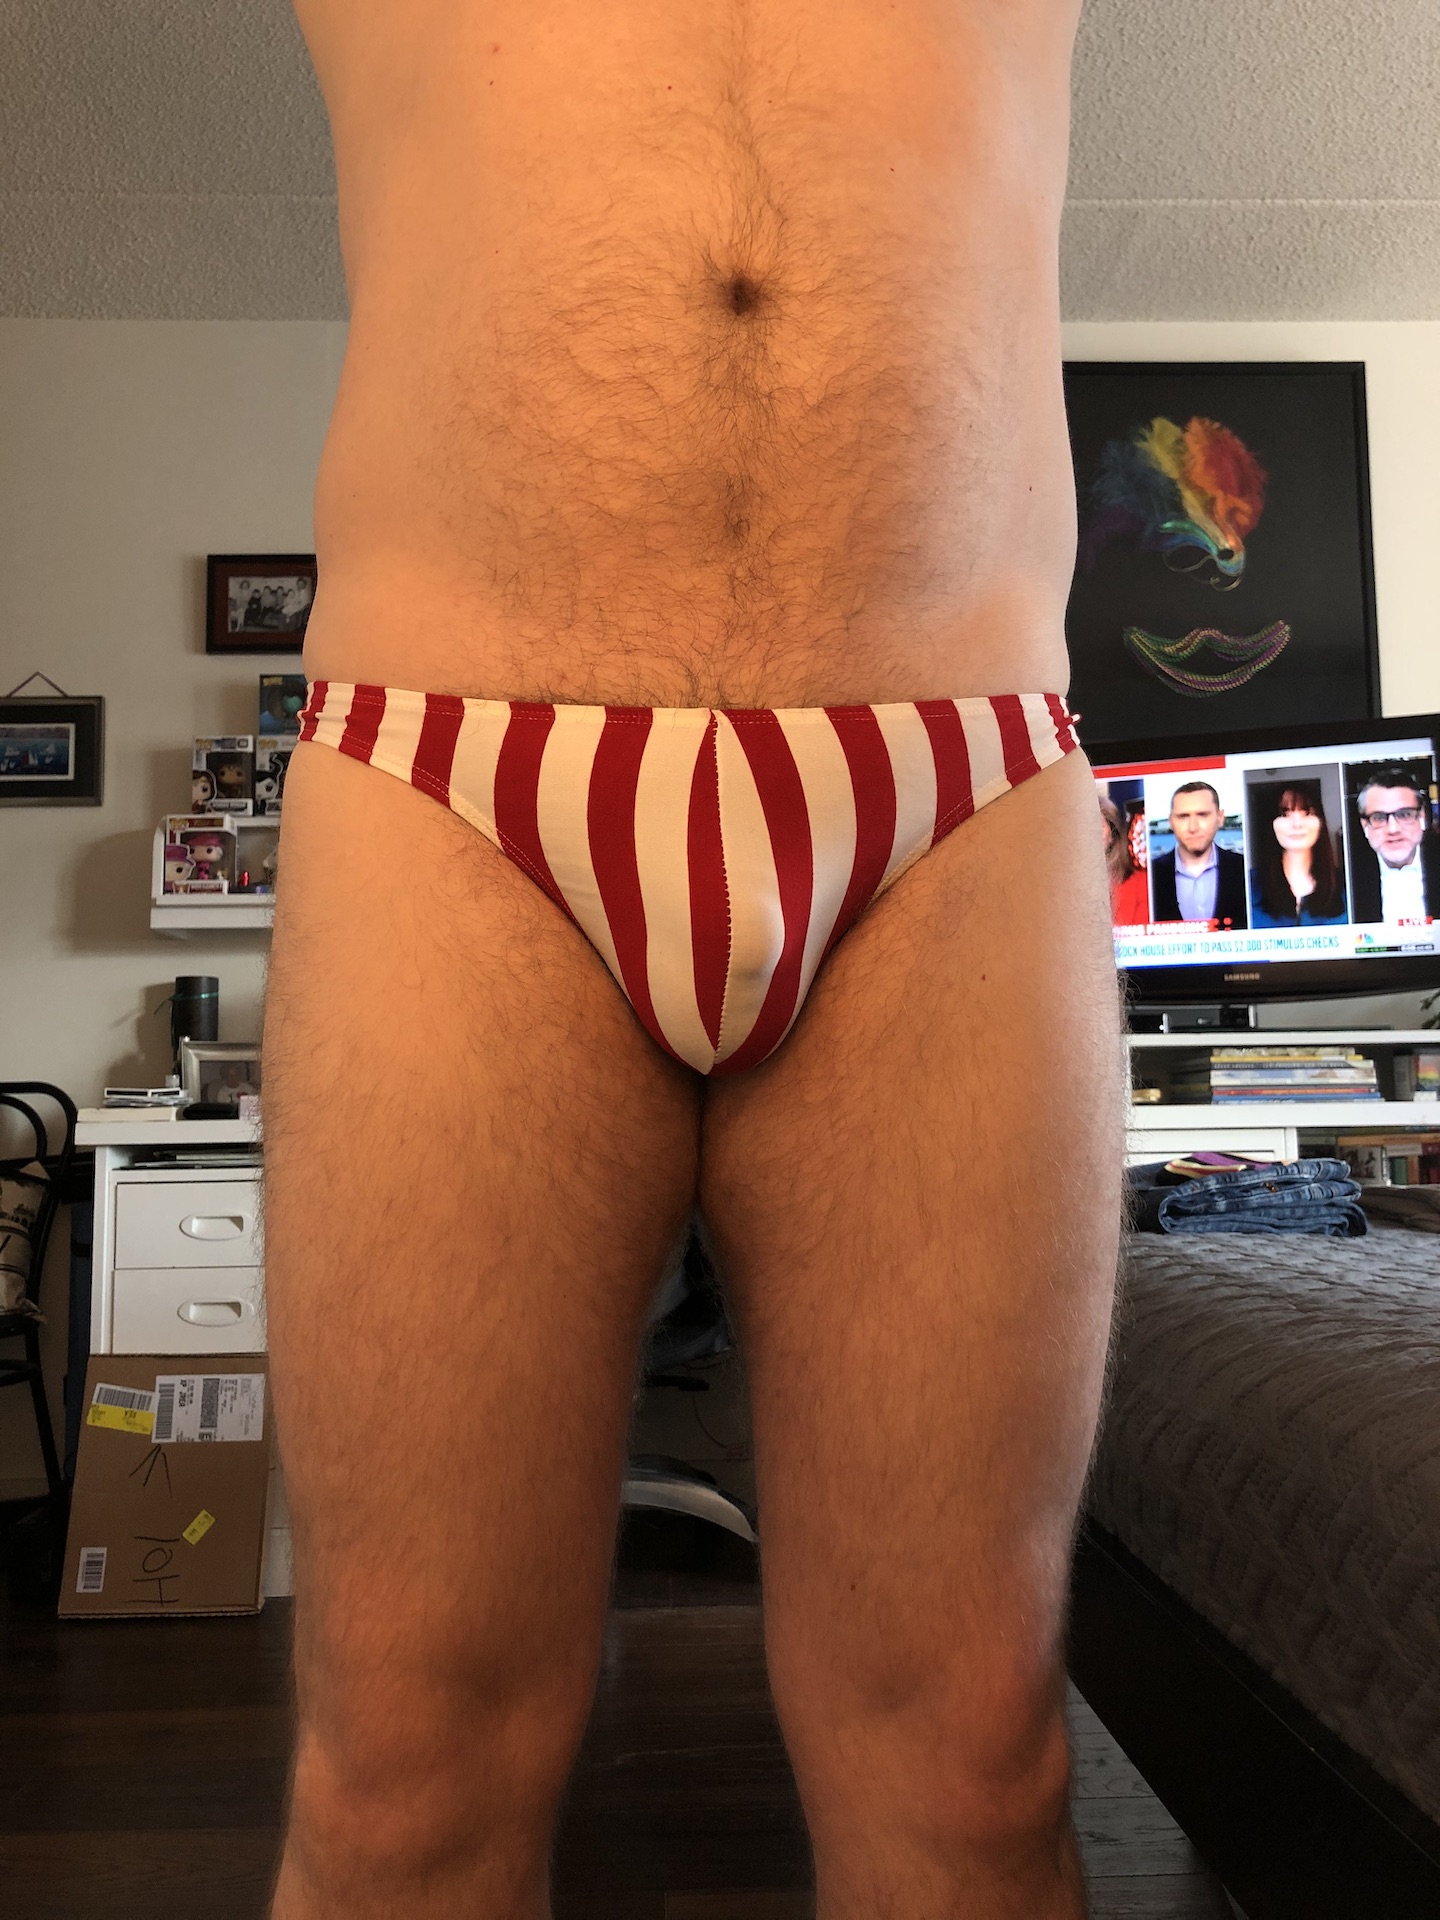 Candy cane stripes in thong form for today…